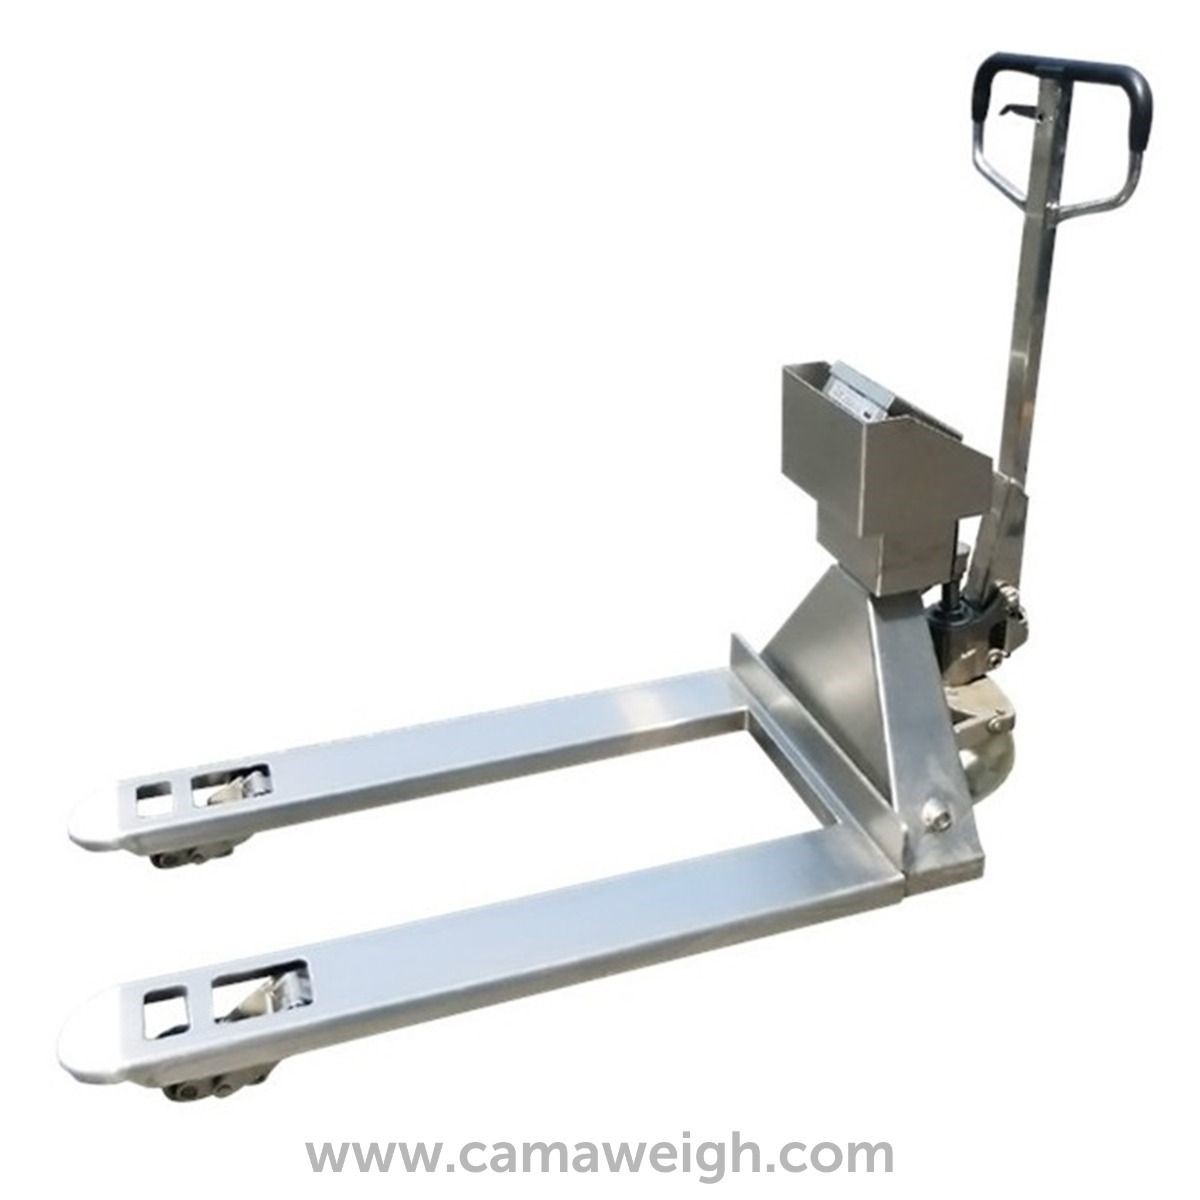 Stainless Steel Pallet Truck Scale in orange for sale at Camaweigh